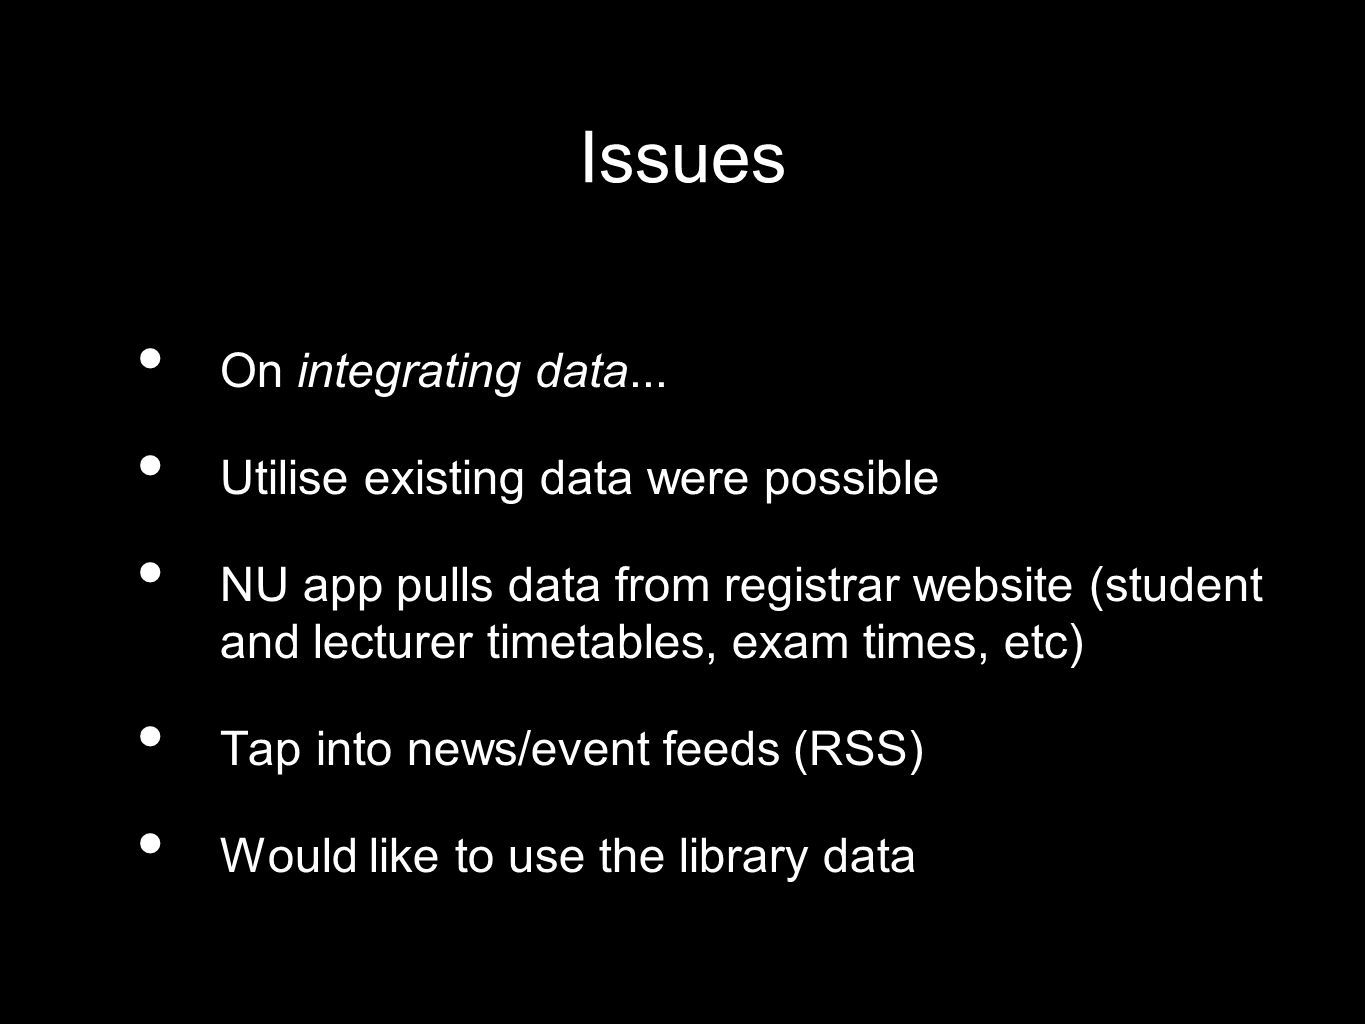 Issues On integrating data...